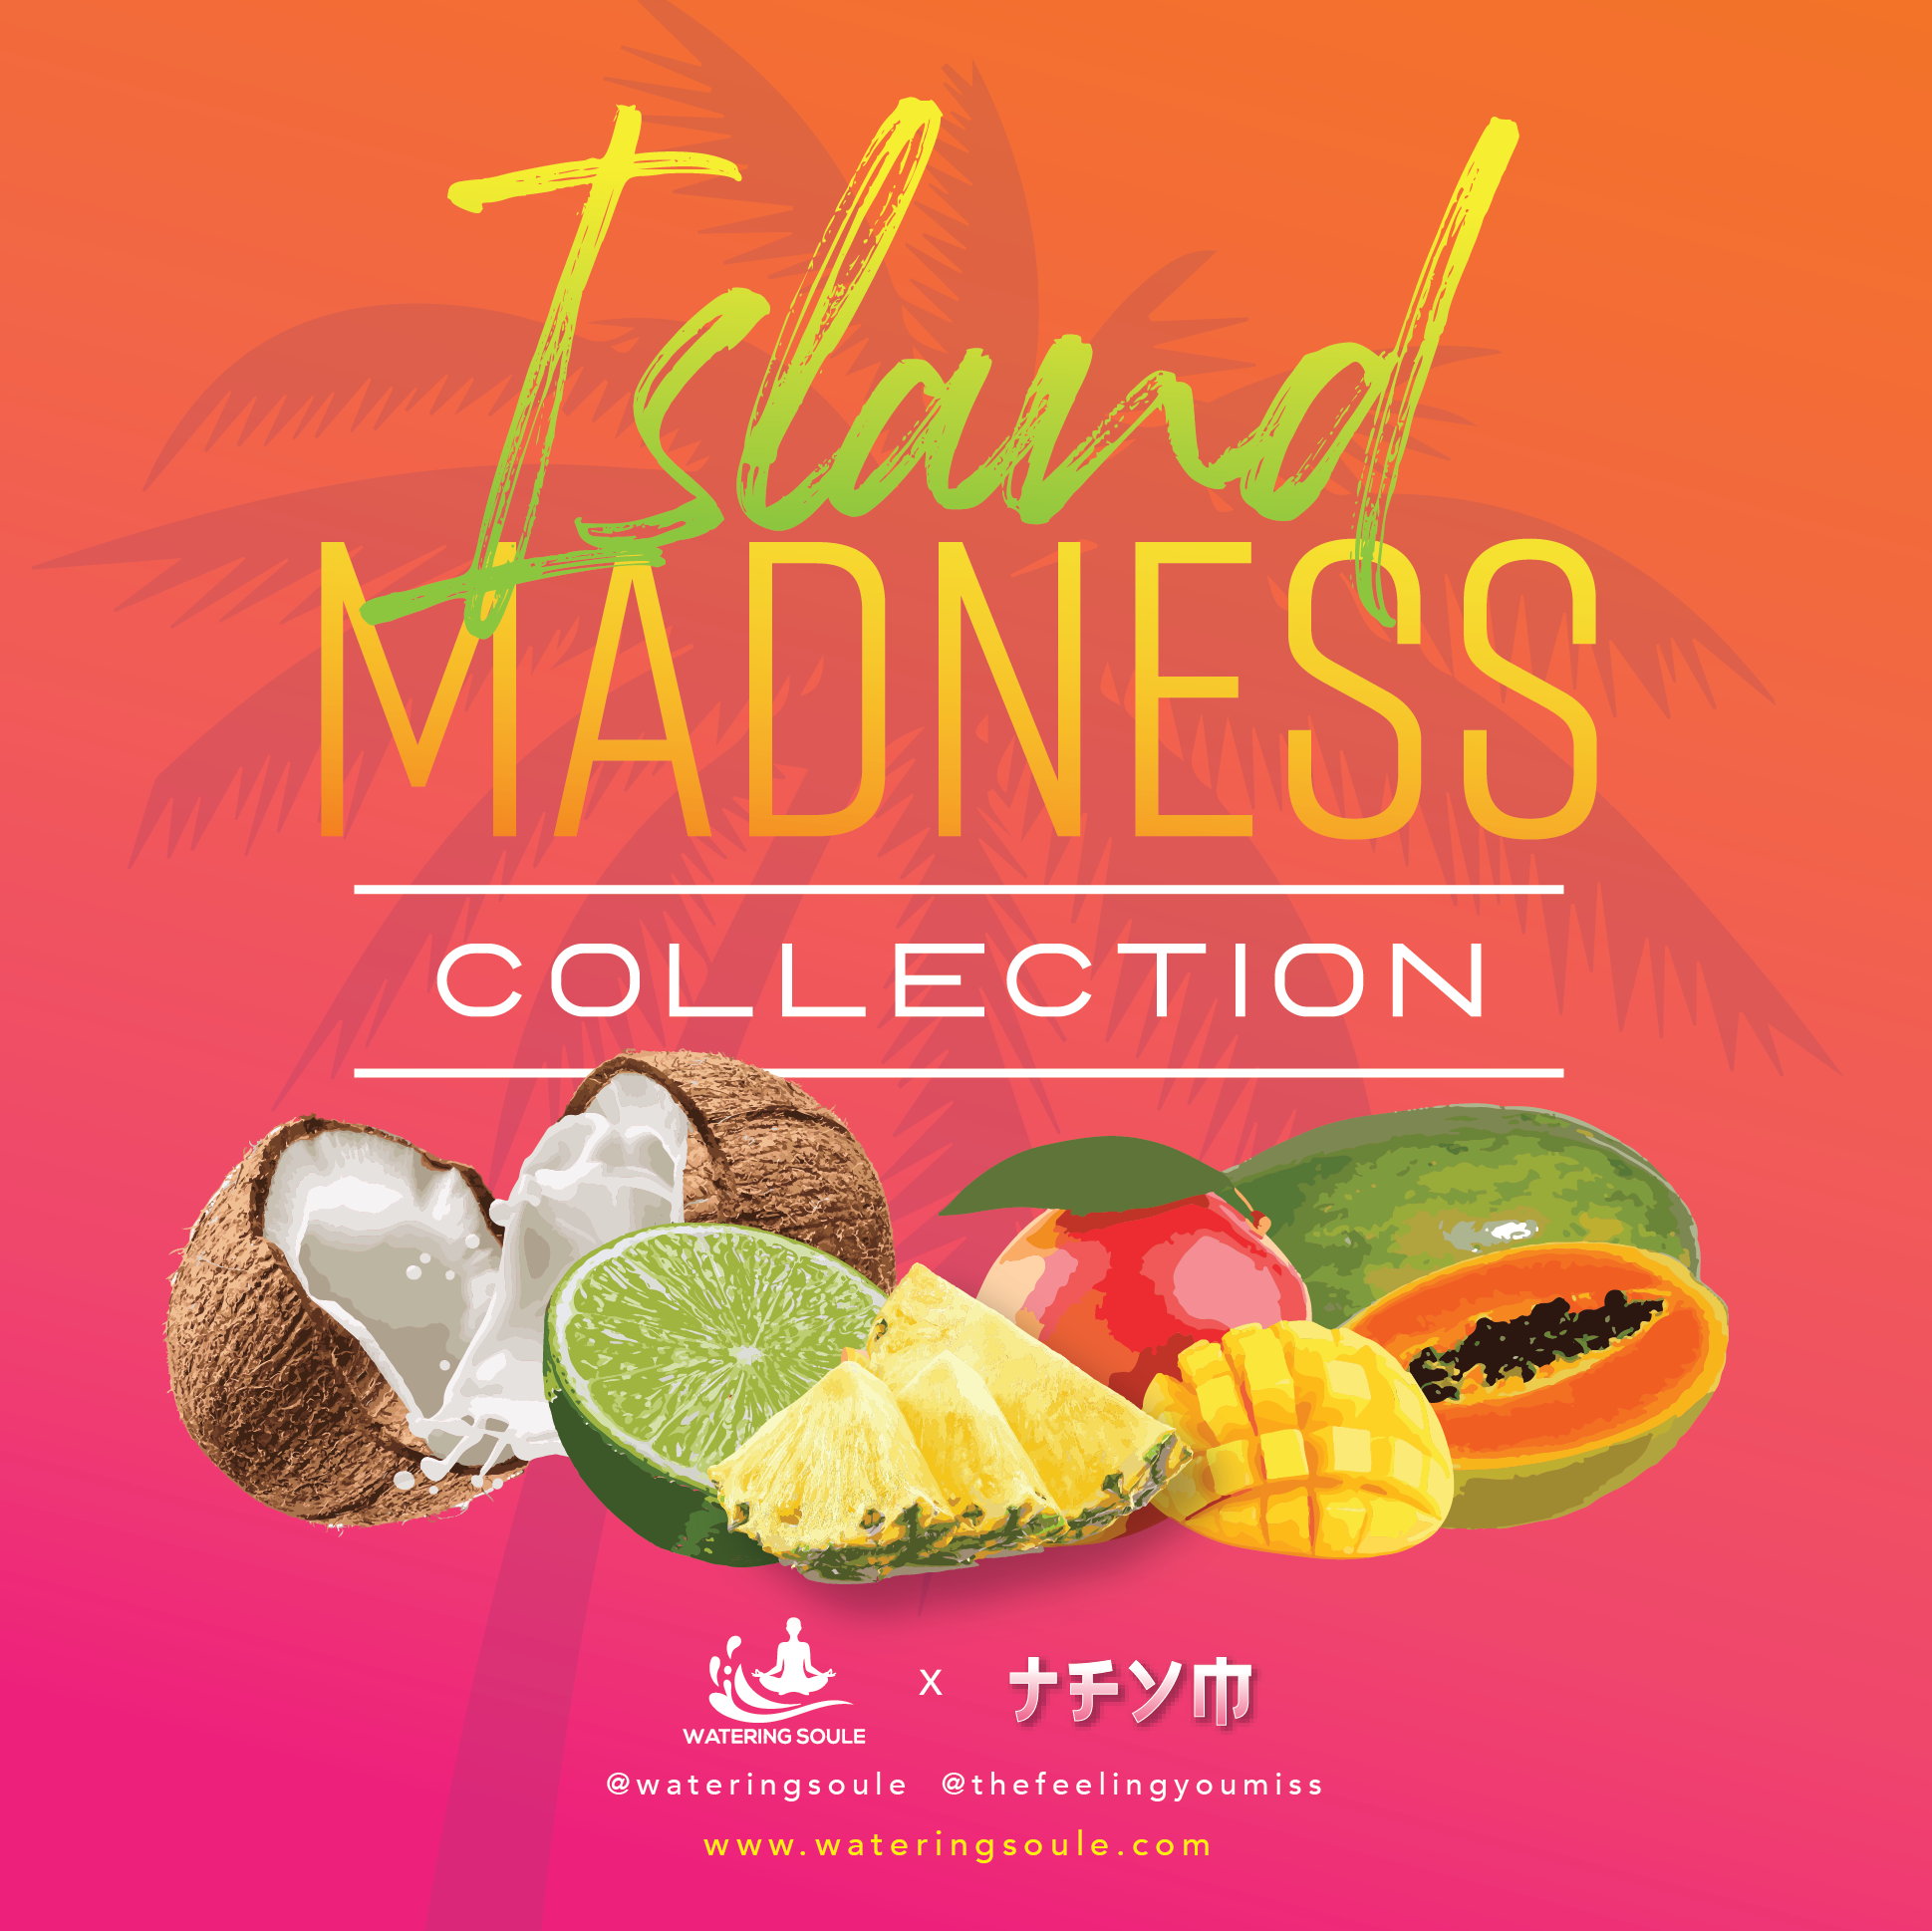 Island Madness Collection Promotion Watering Soule